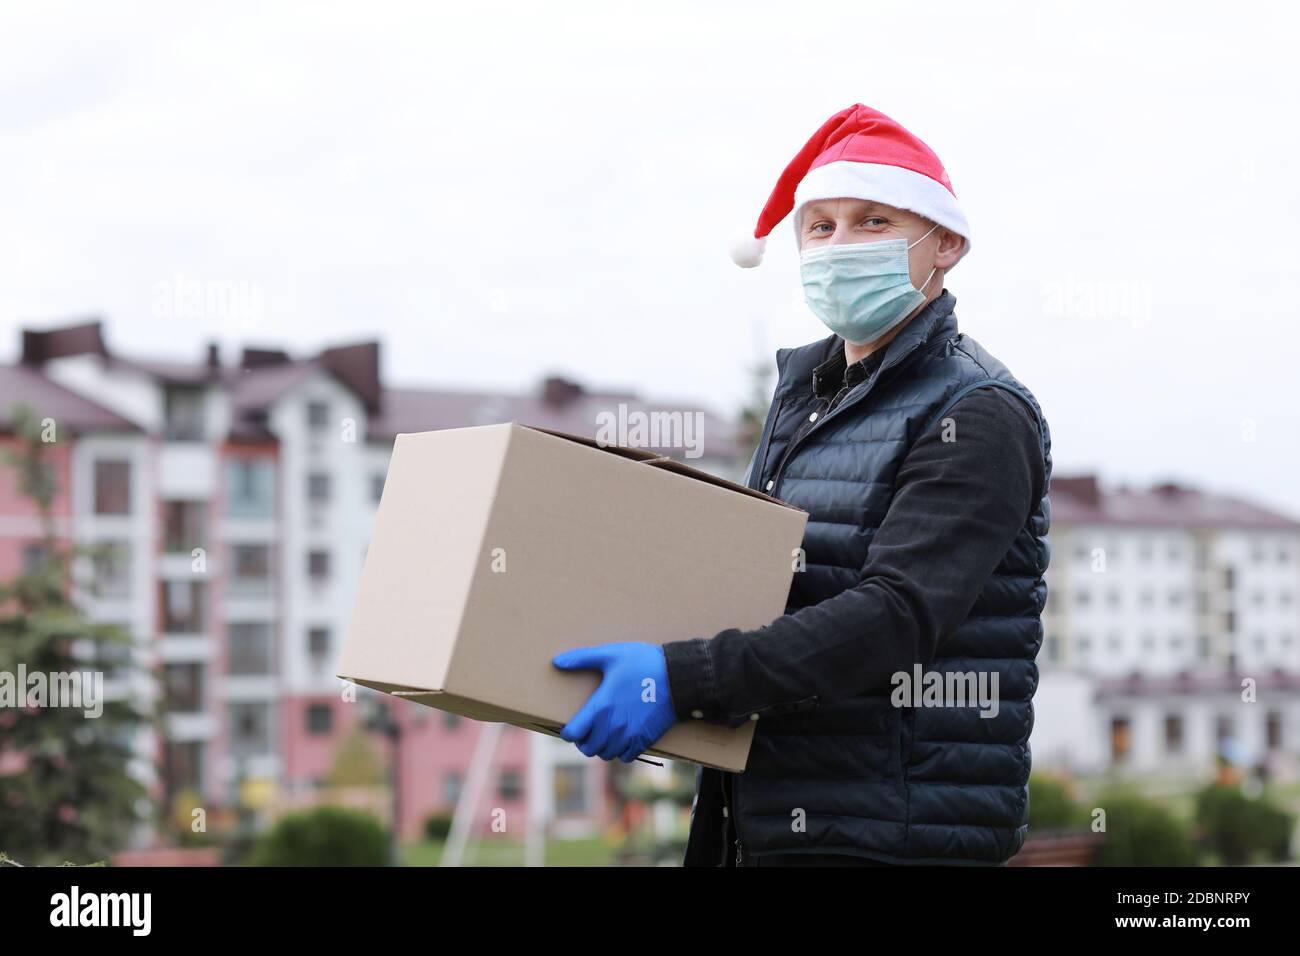 https://c8.alamy.com/comp/2DBNRPY/delivery-man-in-protective-mask-gloves-and-santas-hat-holding-box-in-hands-outdoors-delivery-service-during-coronavirus-in-holiday-time-2DBNRPY.jpg